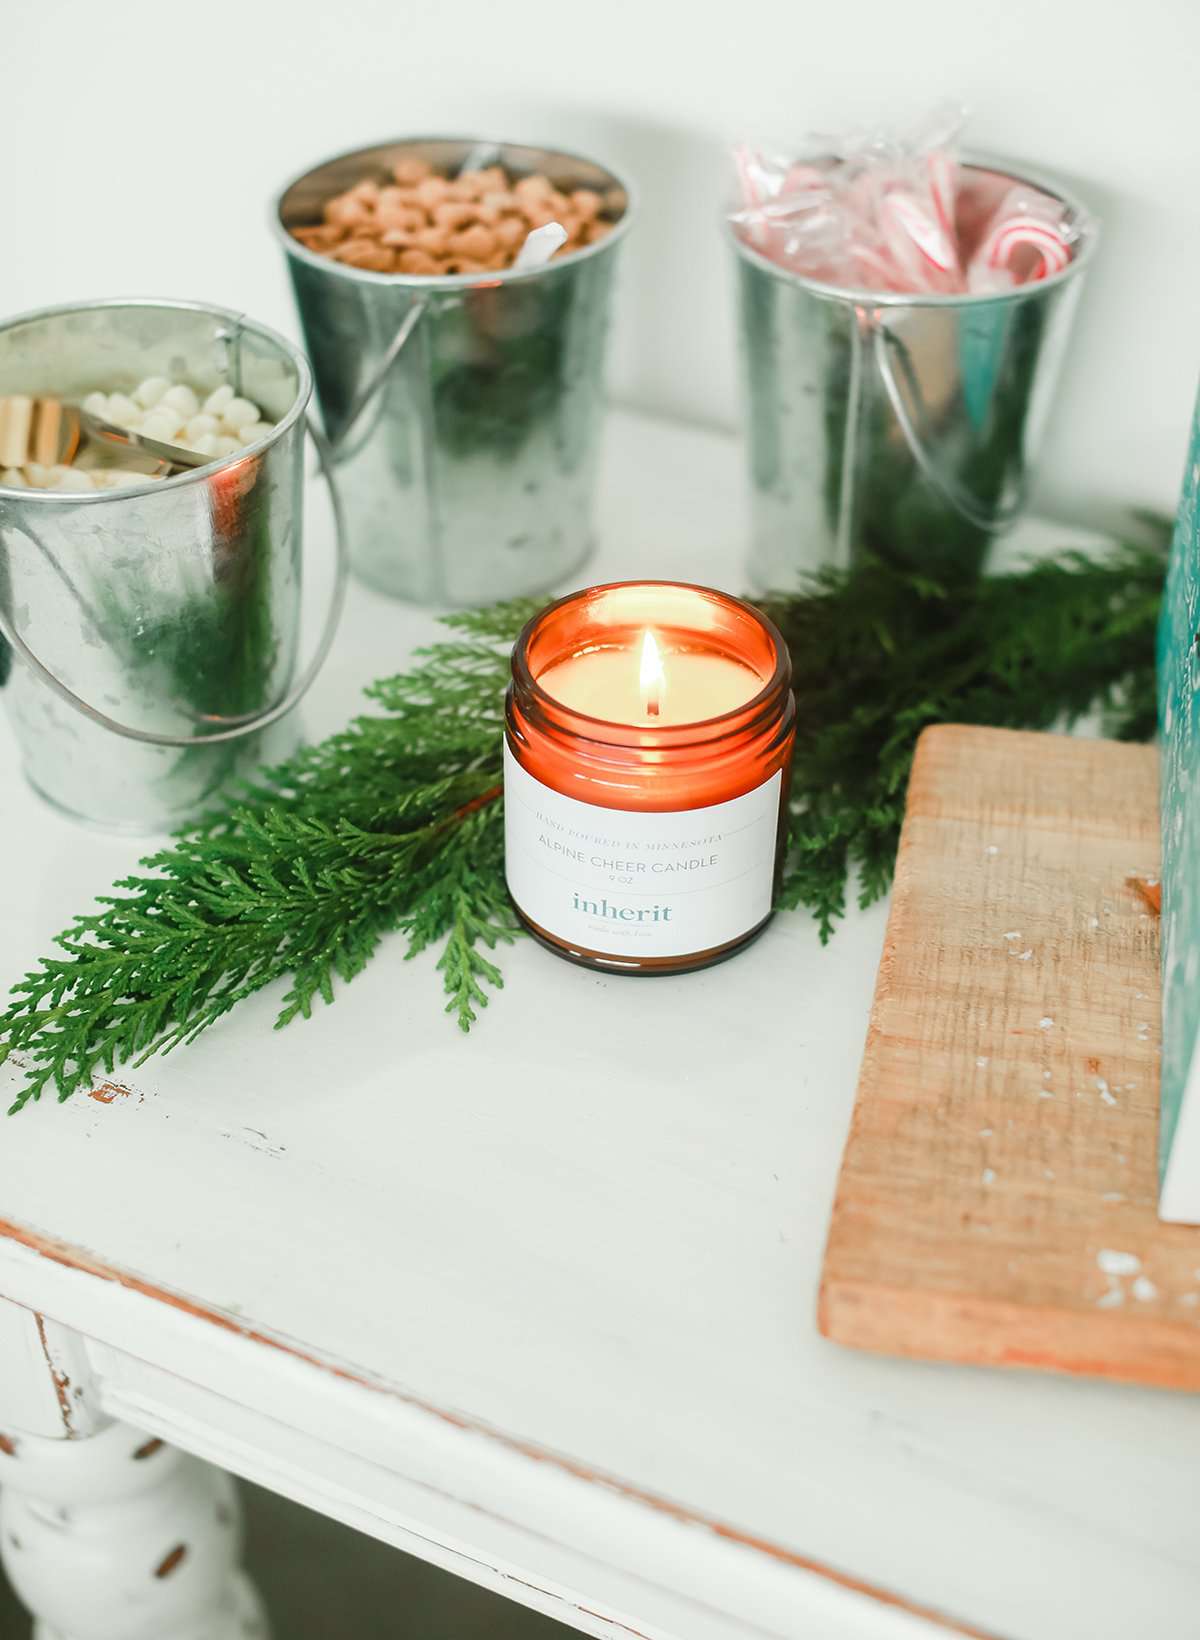 Inherit Soy Candle - FINAL SALE Home & Lifestyle